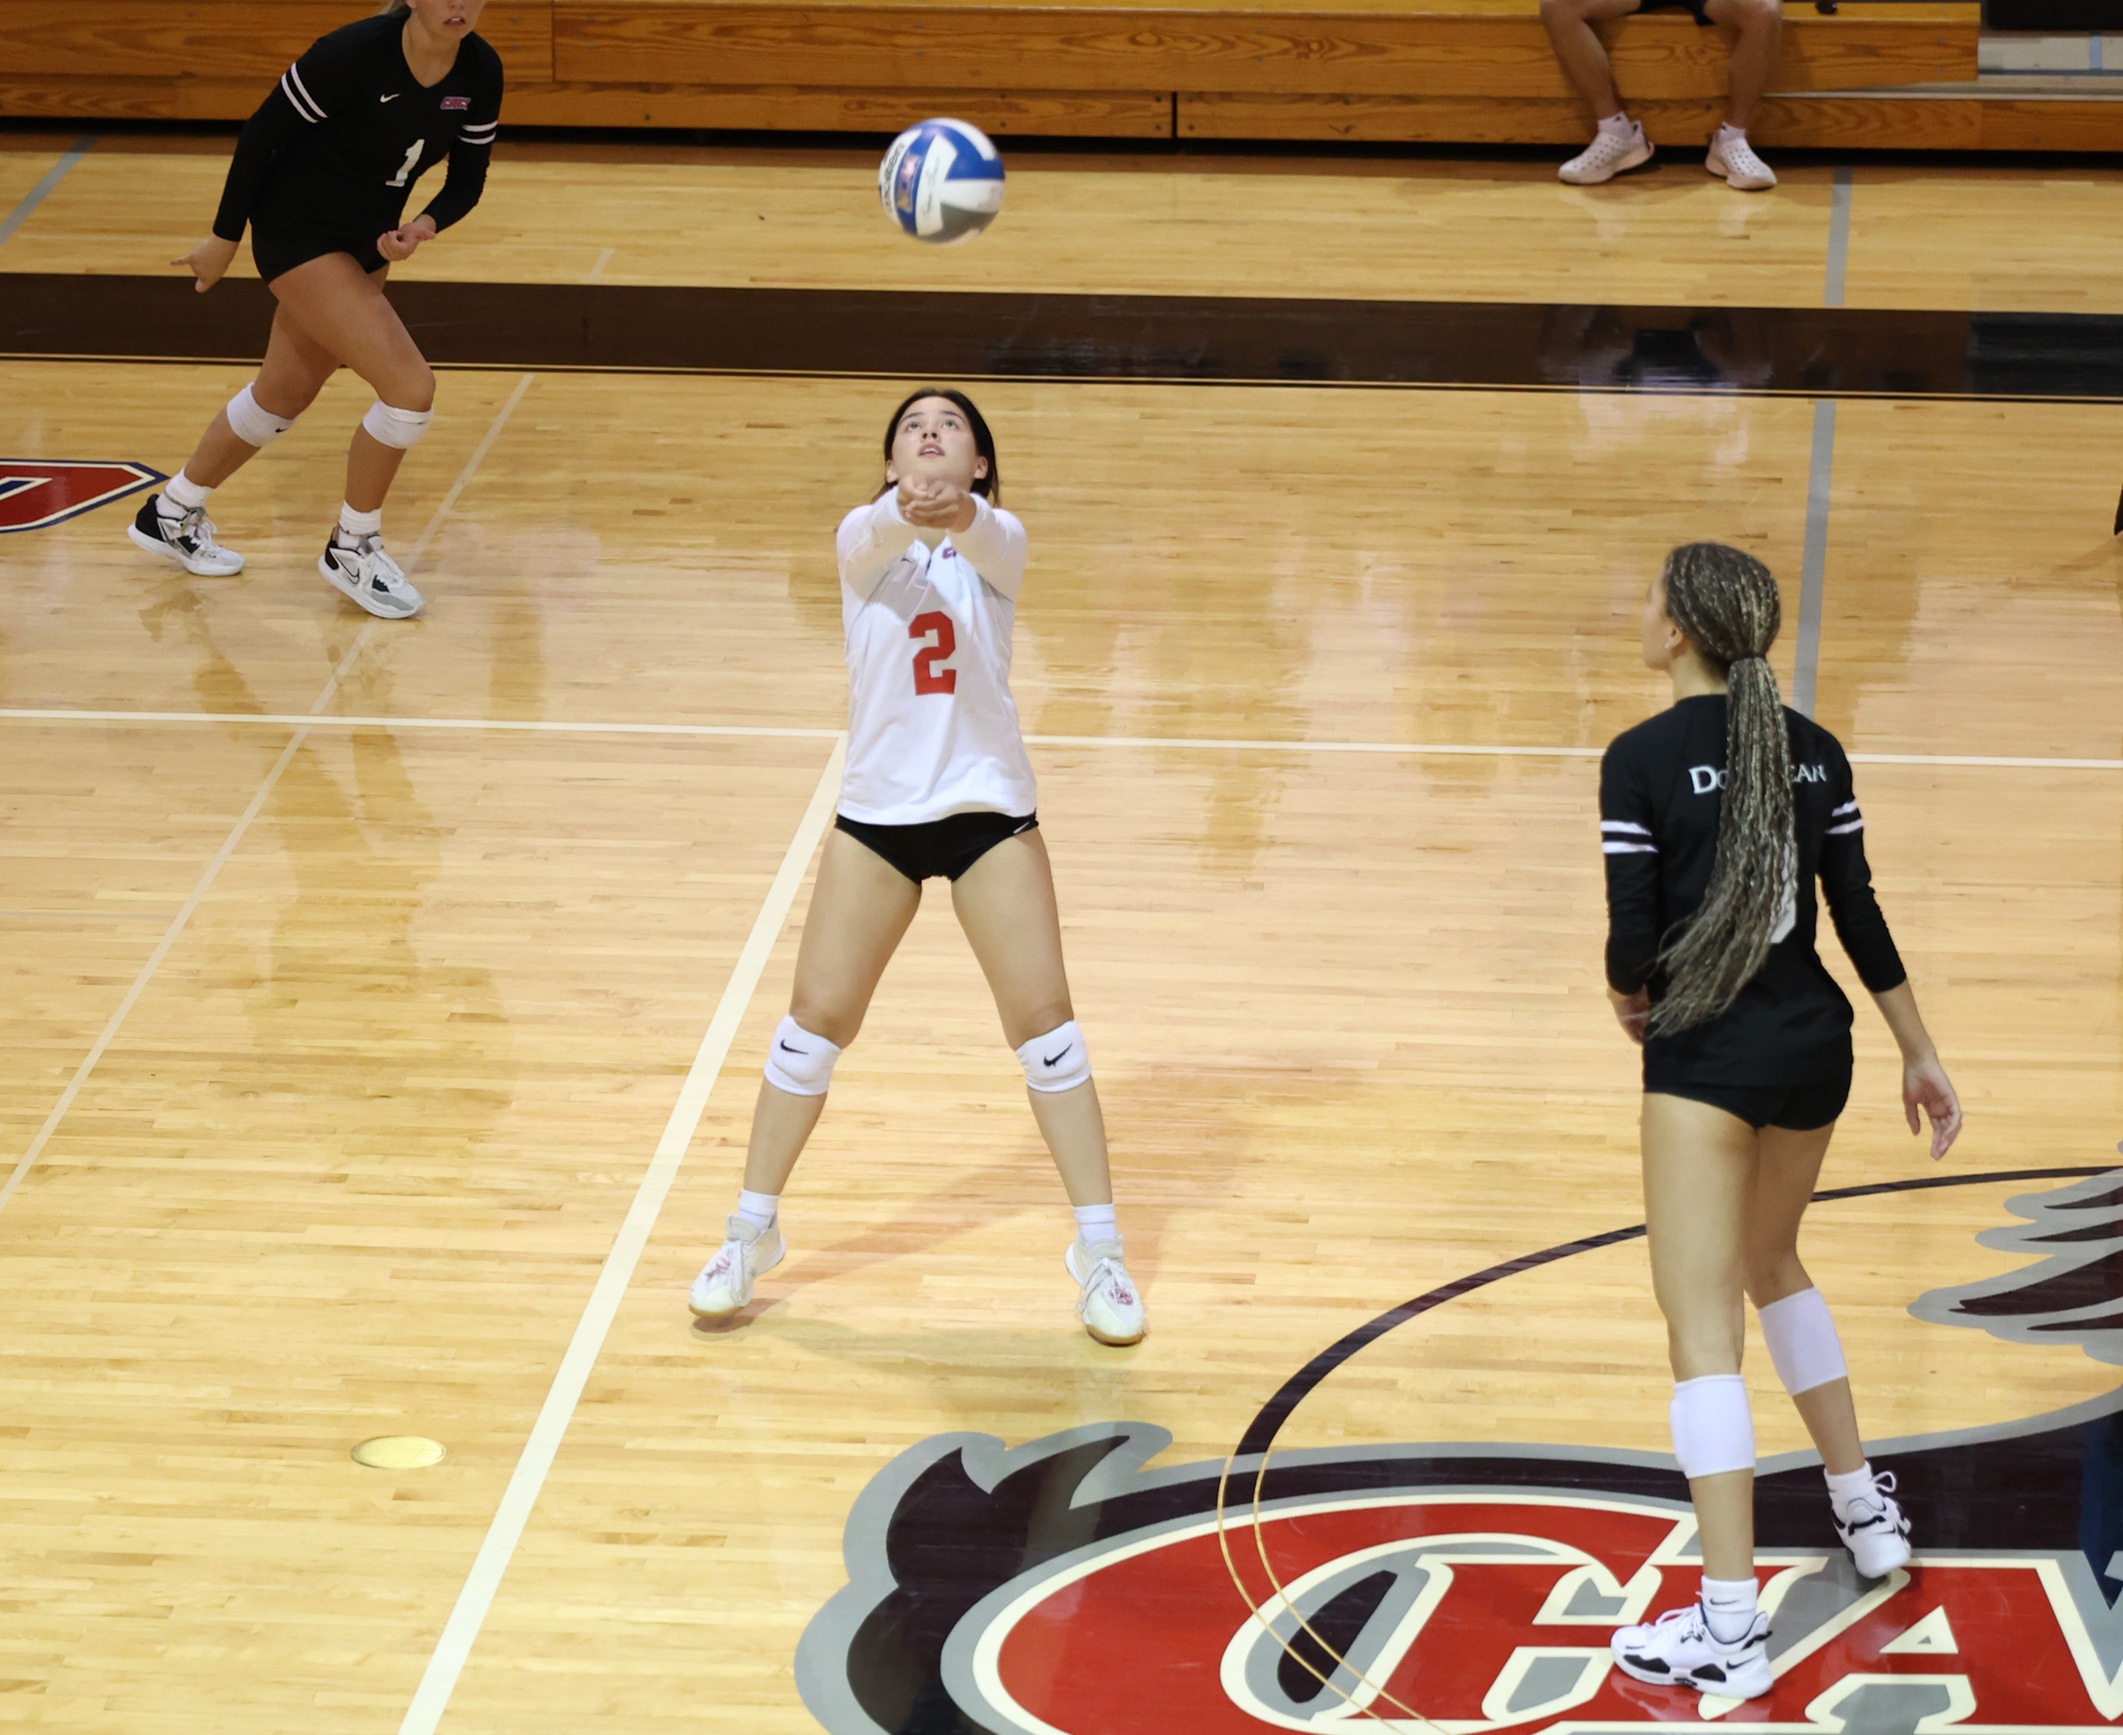 CHARGERS FALL IN FIVE SETS TO TIGERS